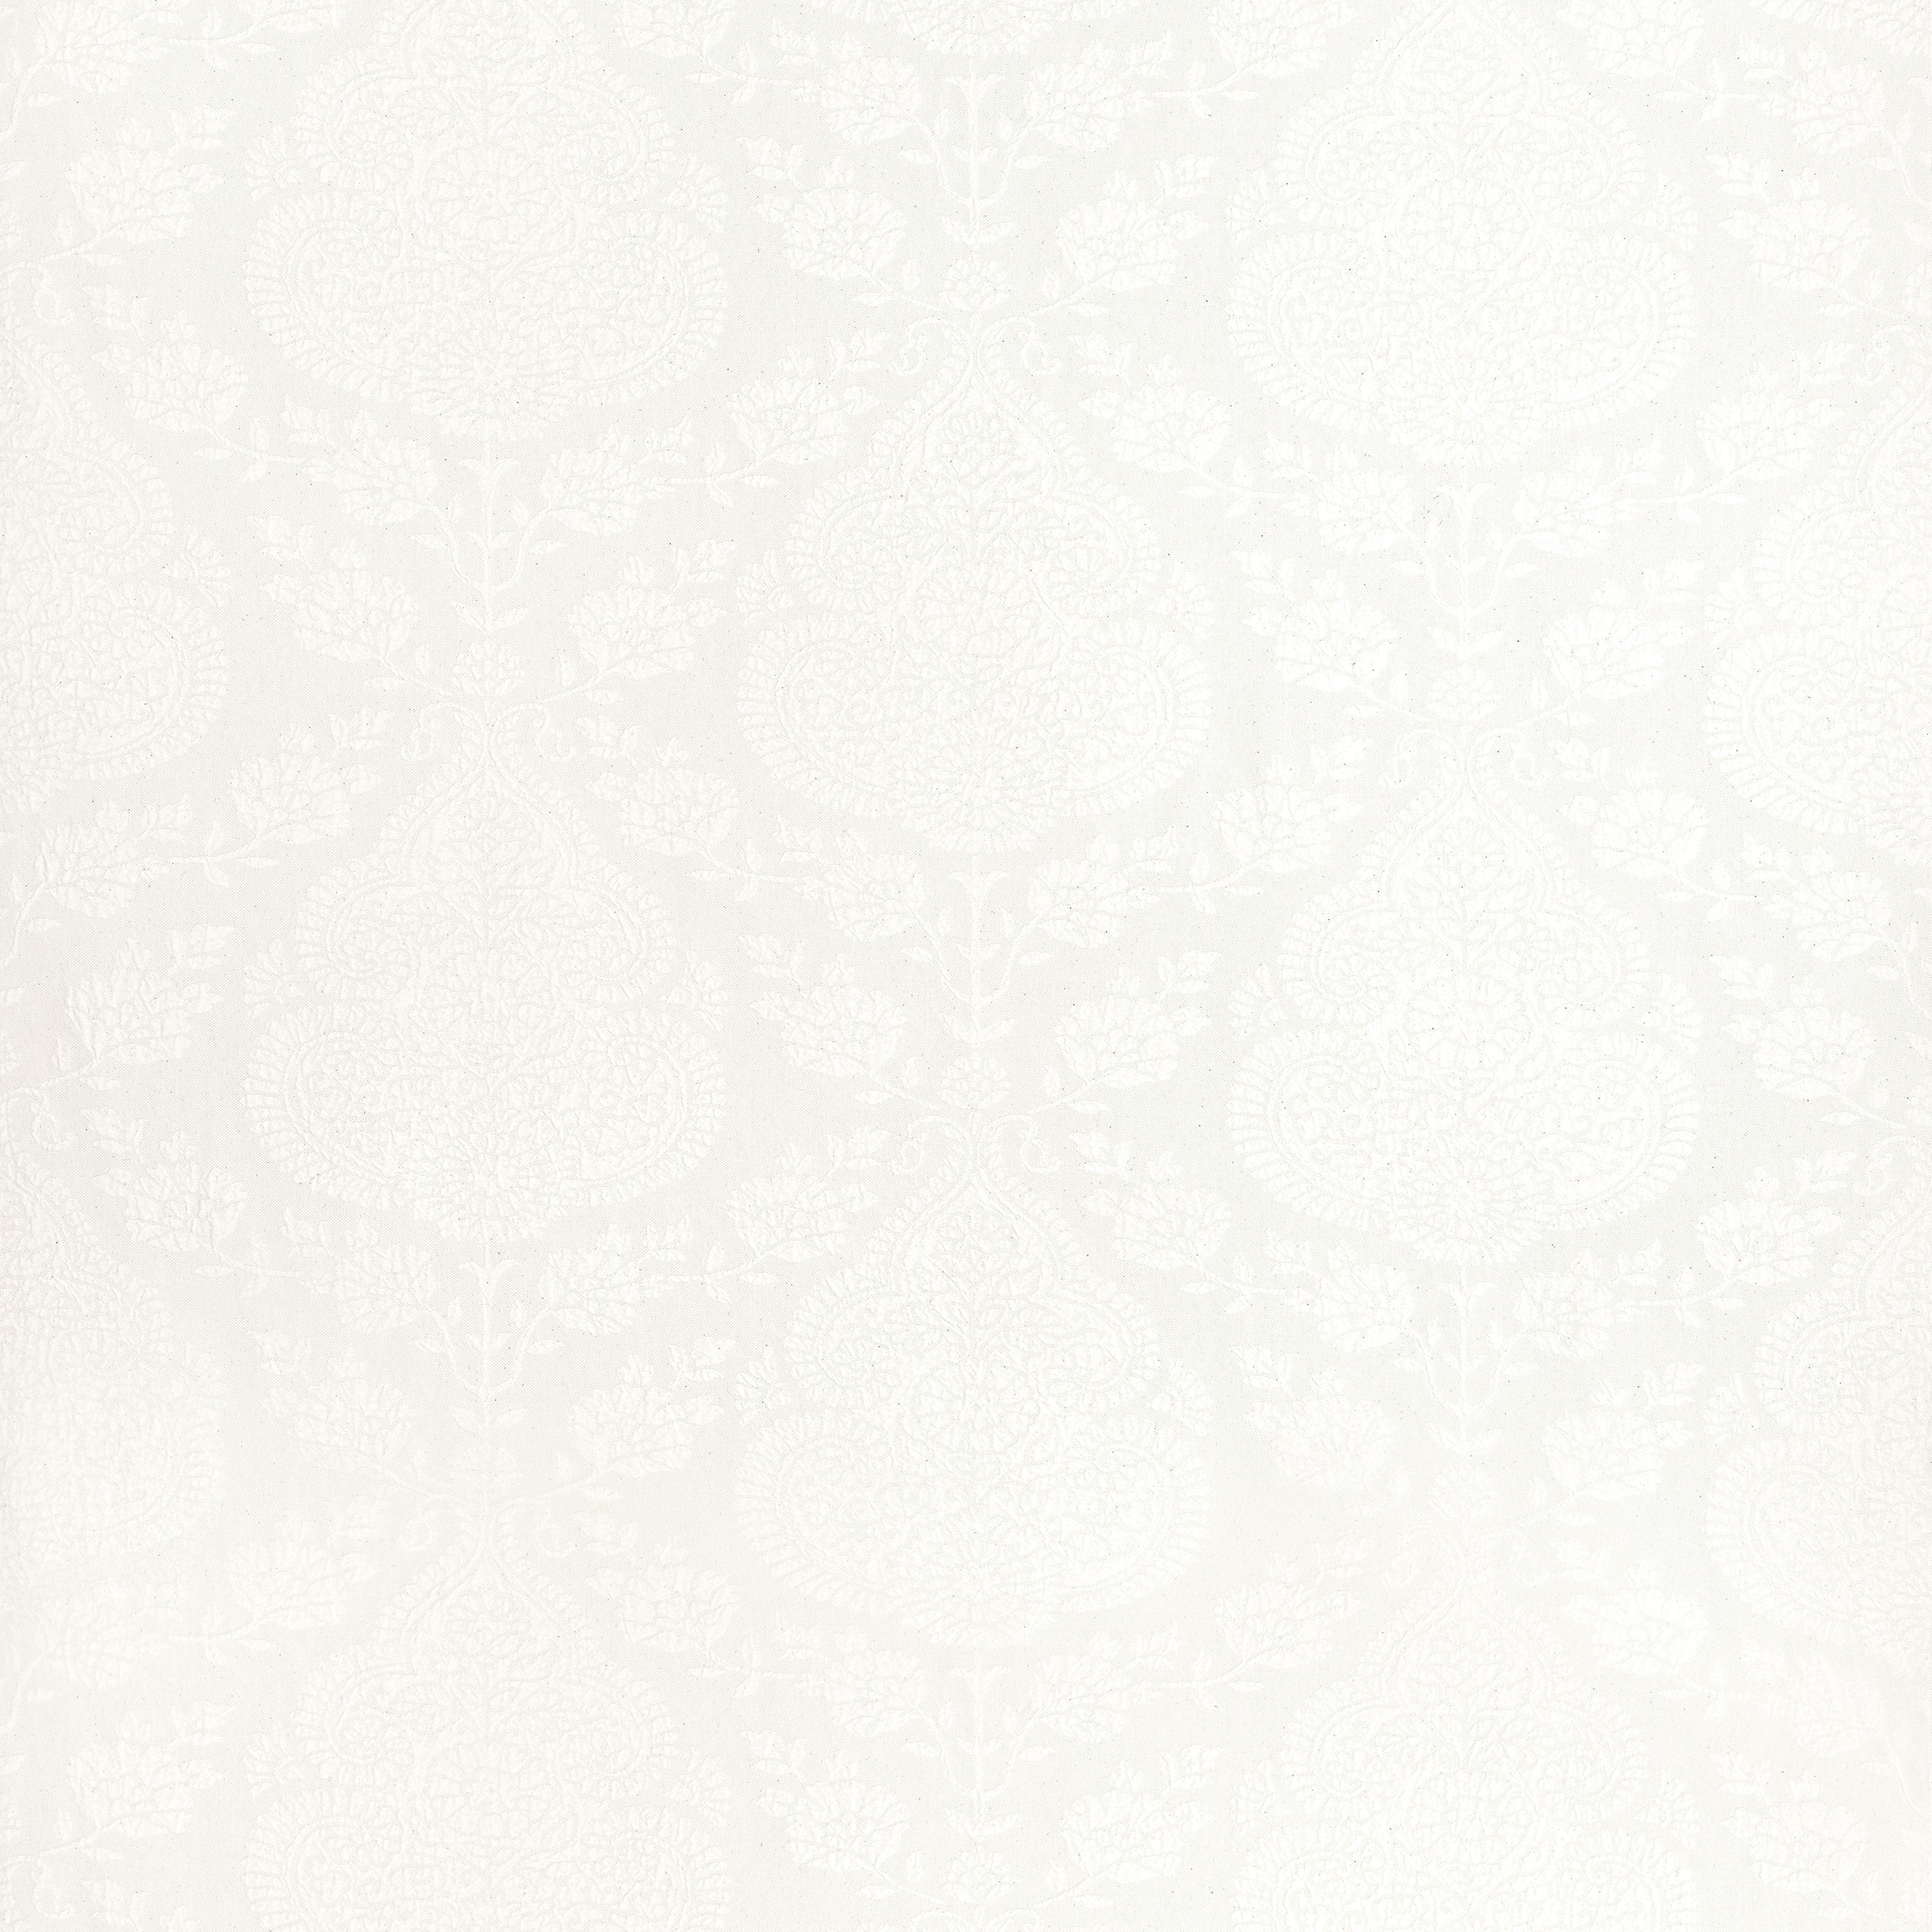 Balmuccia Matelasse fabric in white color - pattern number AW57855 - by Anna French in the Bristol collection